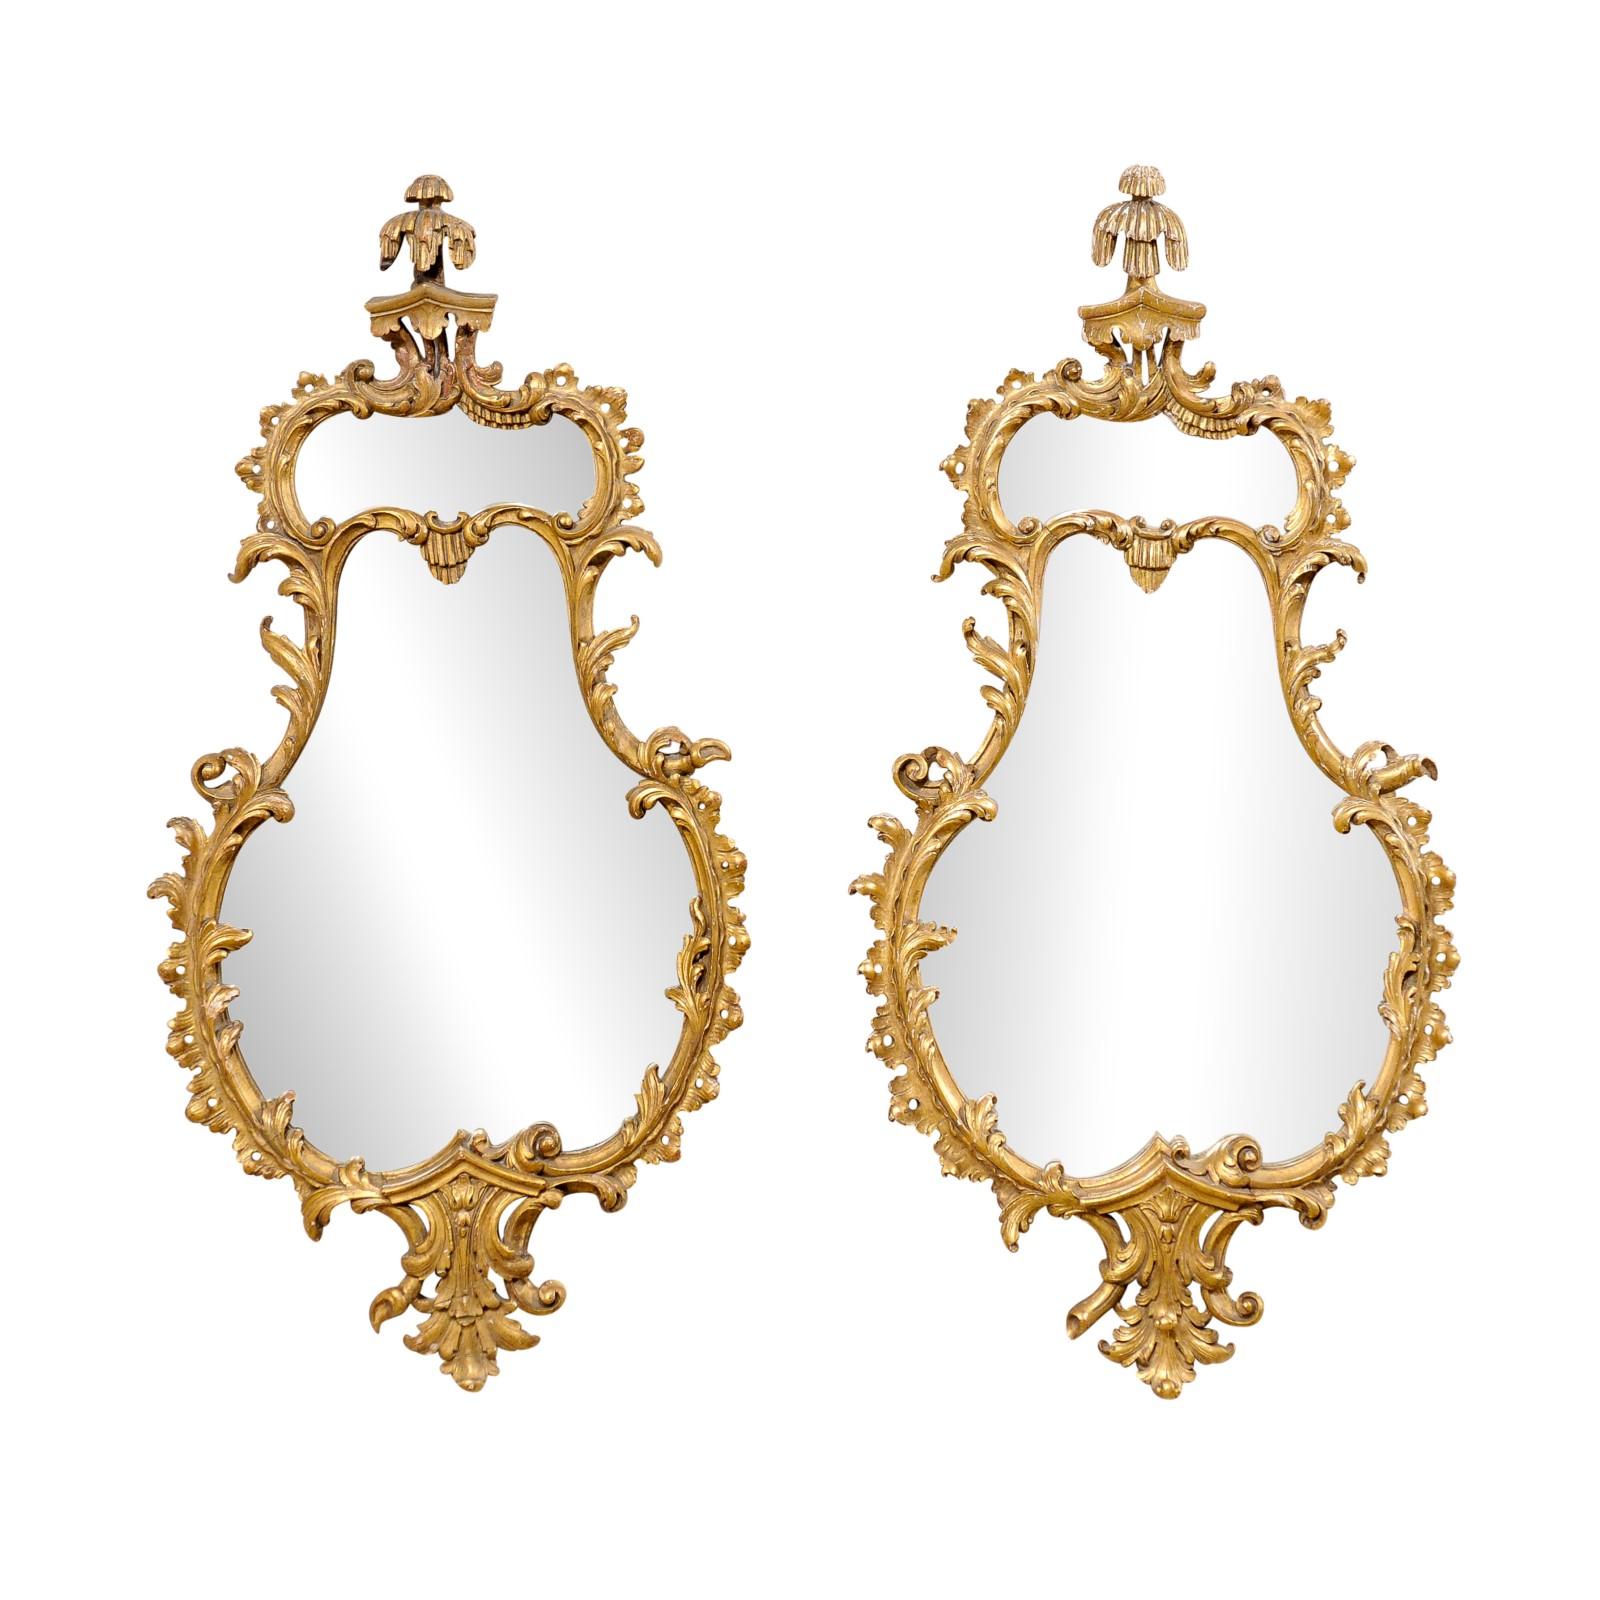 An Italian pair of carved and gilt decorative wall mirrors from the mid 20th century. These vintage mirrors from Italy have shapely-carved, acanthus motif surrounds with beautifully adorn top crests which project outwardly, suspended above the